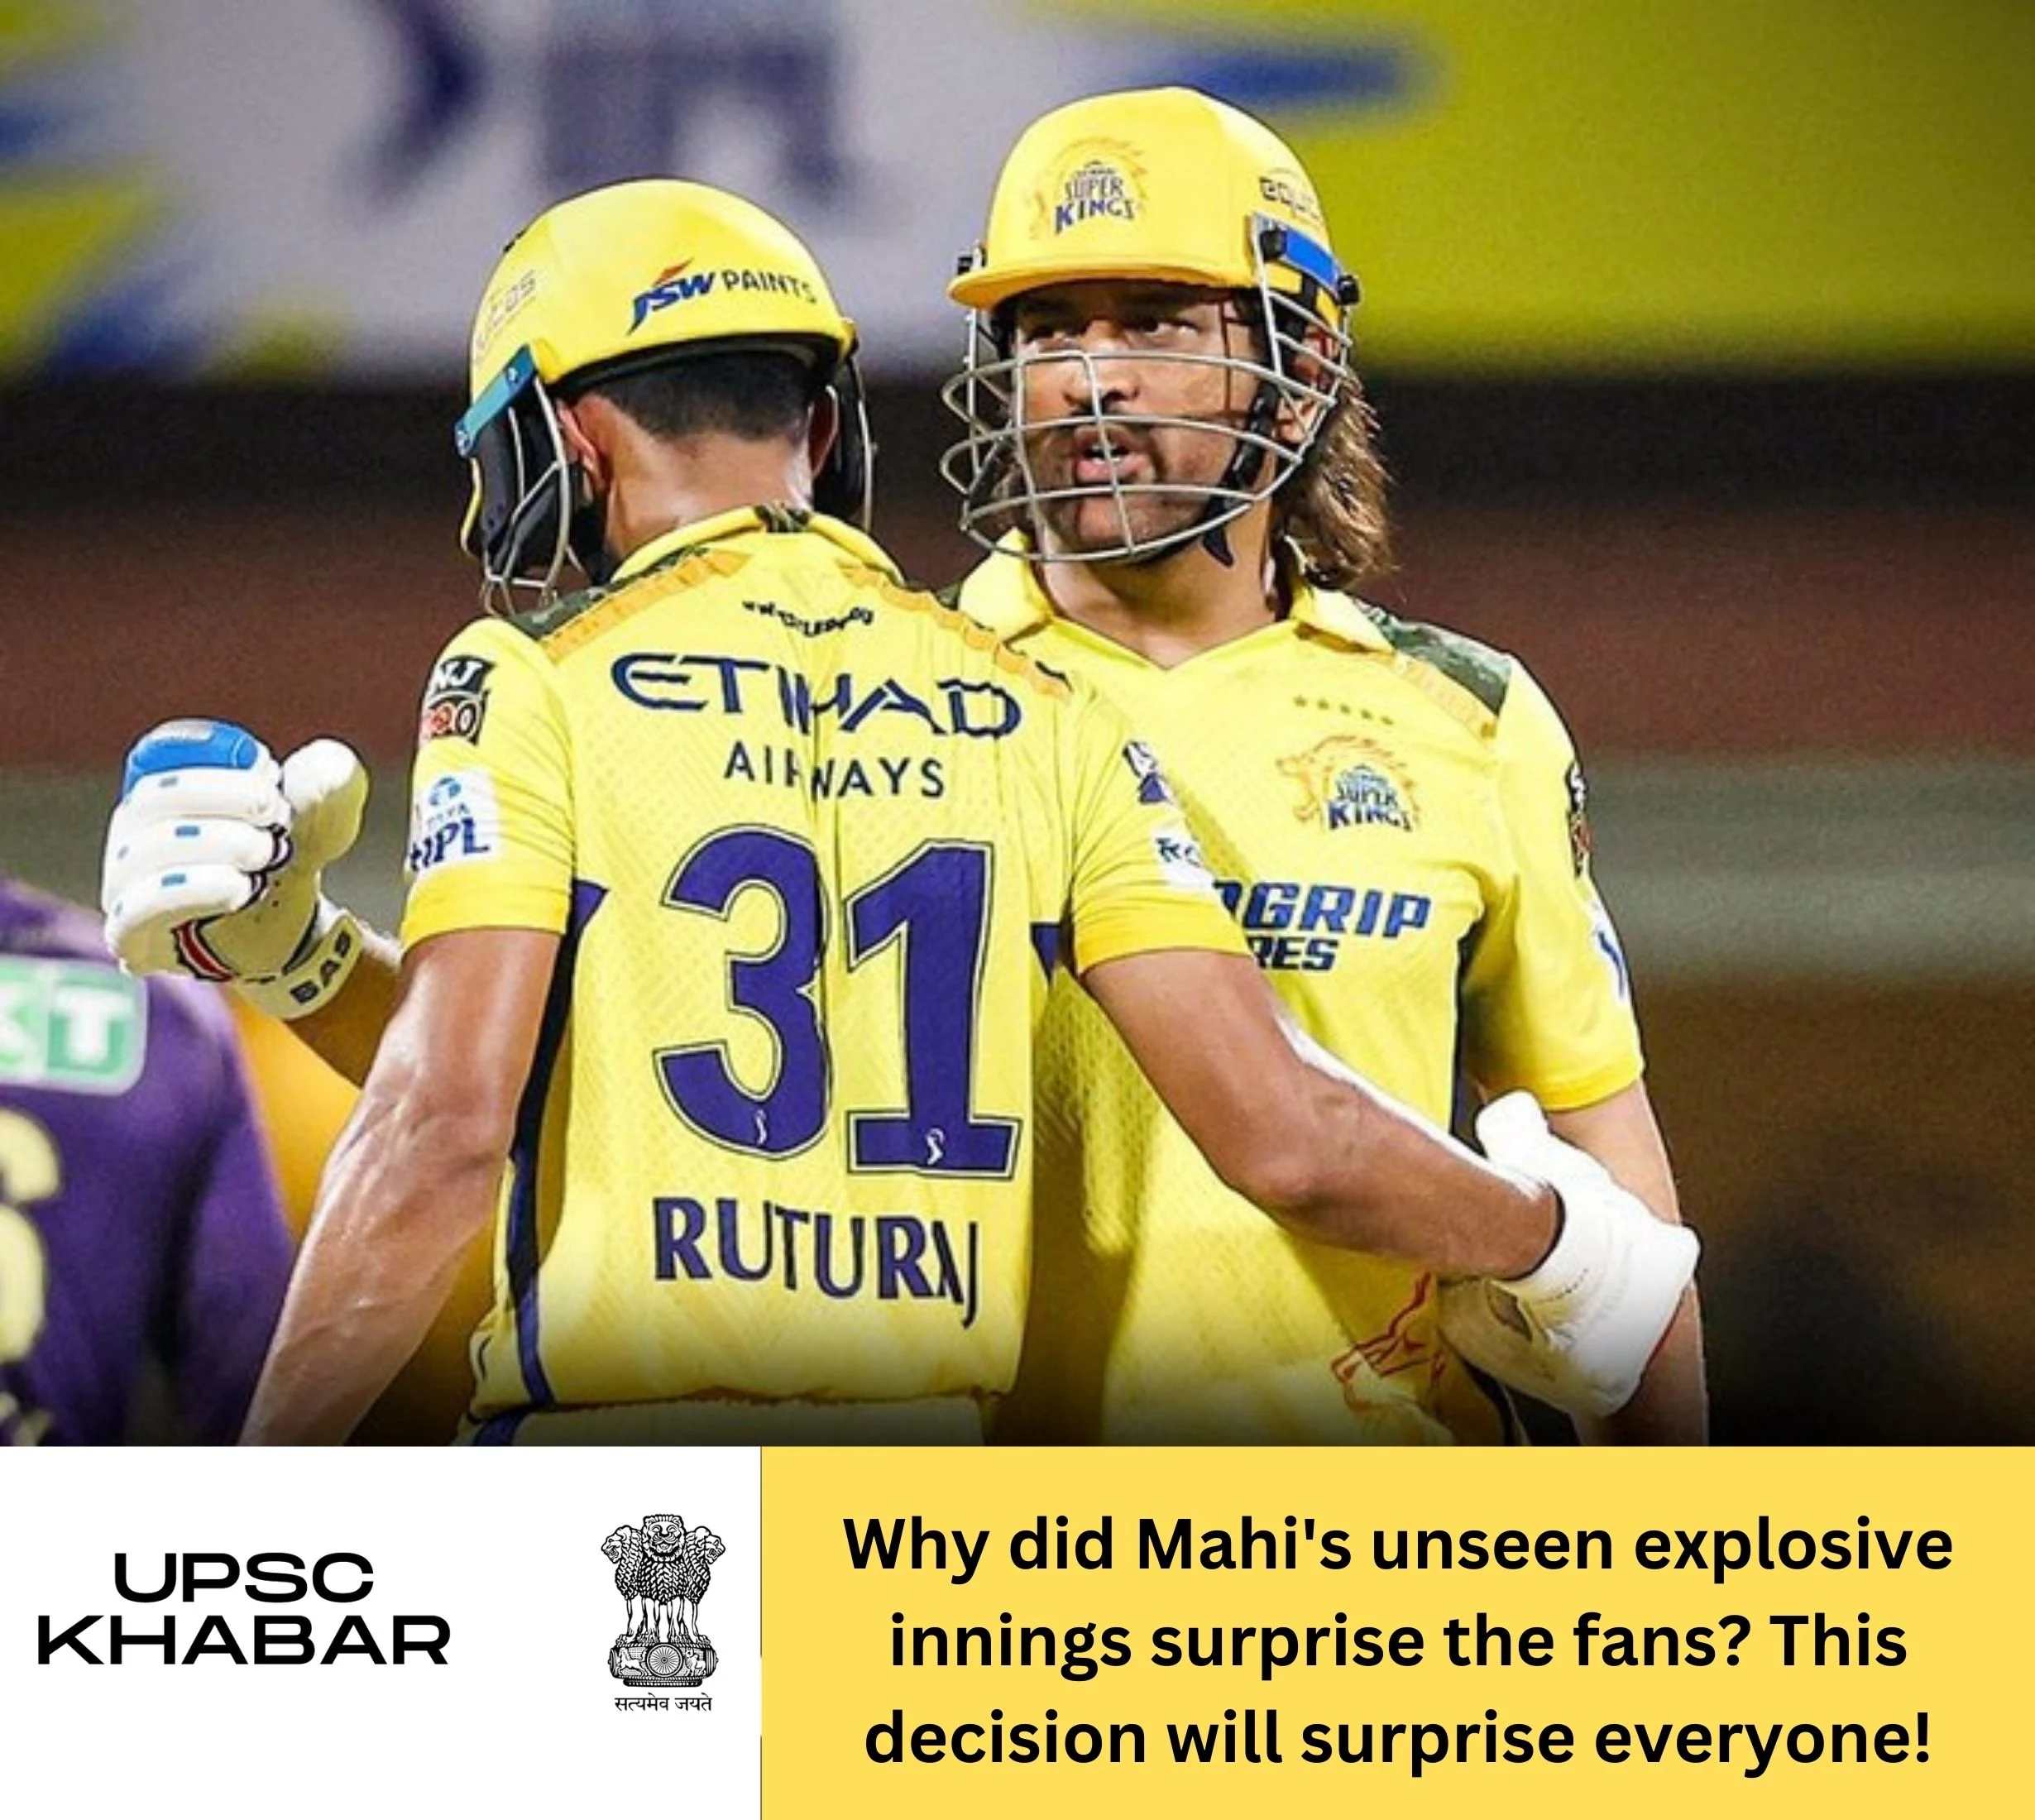 Why did Mahi's unseen explosive innings surprise the fans? This decision will surprise everyone!